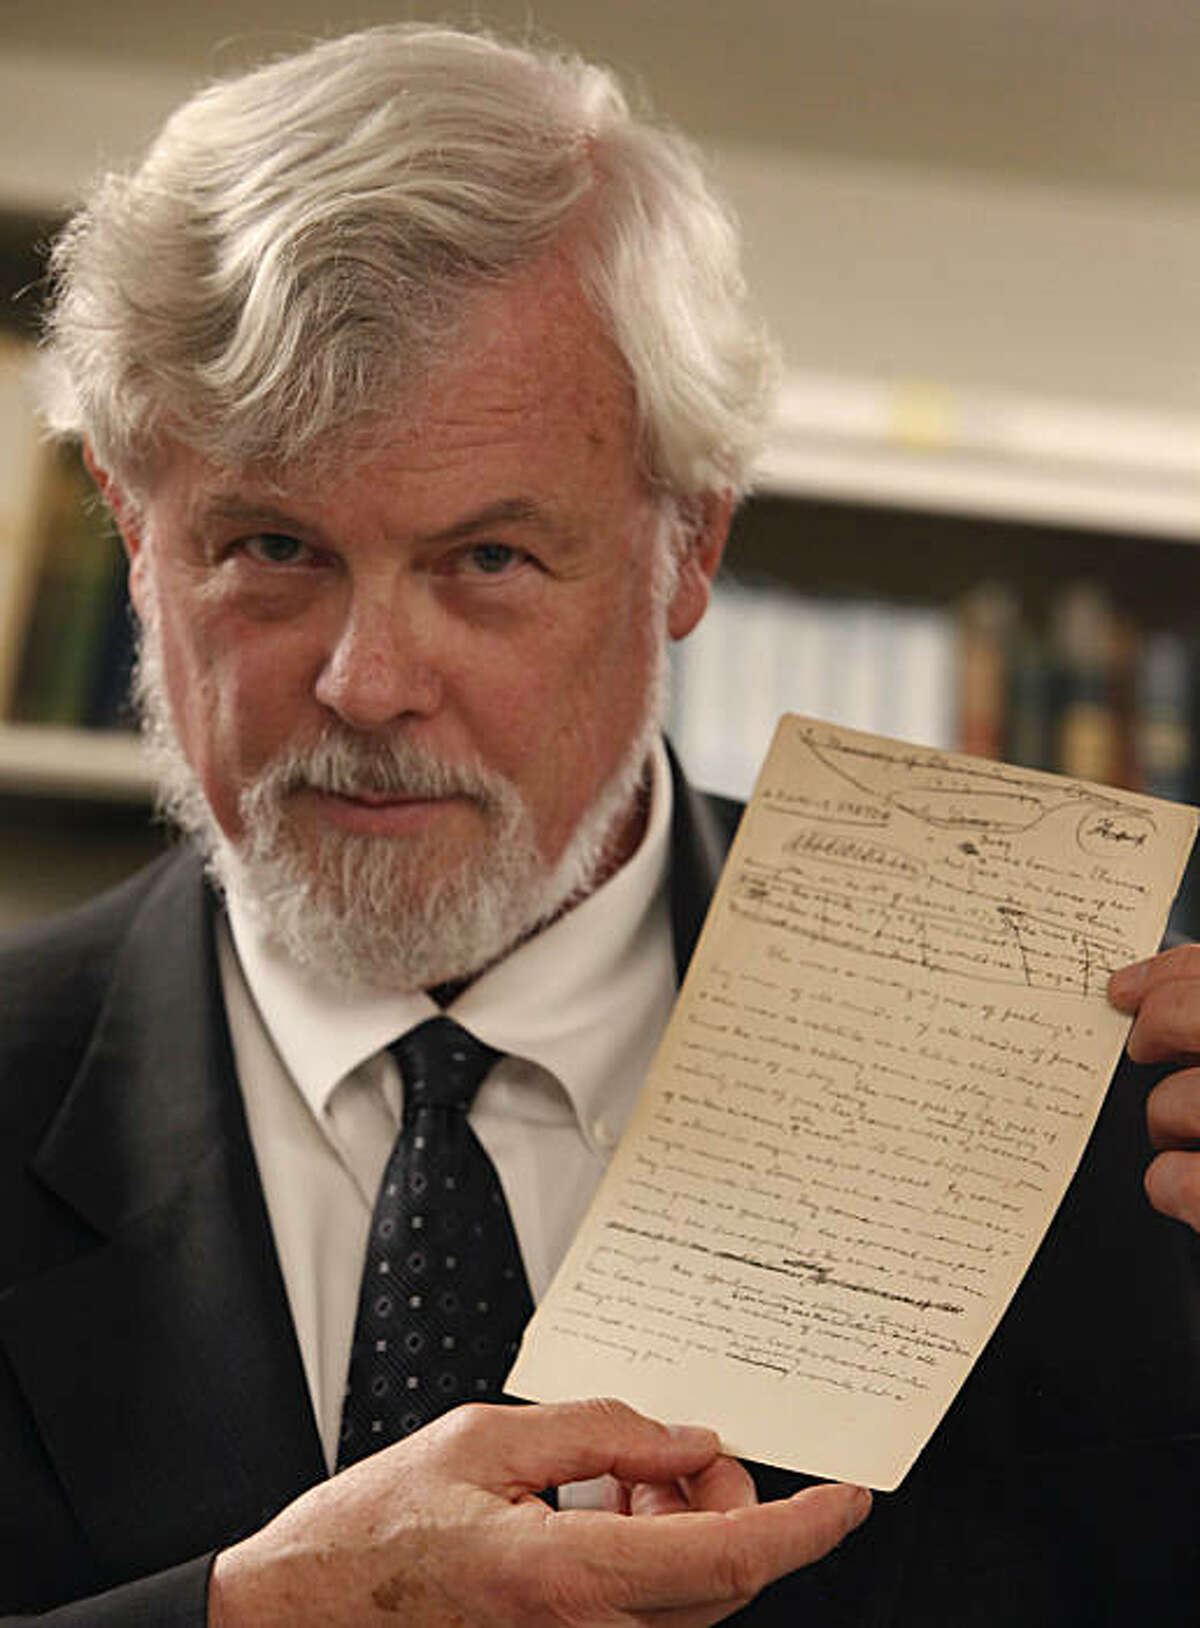 Robert Hirst, general editor Mark Twain Project, holds the first page of "A Family Sketch", a recent acquisition for UC Berkeley, in the Mark Twain Papers vault at the Bancroft Library at UC Berkeley on Friday, November 5, 2010 in Berkeley, Calif.